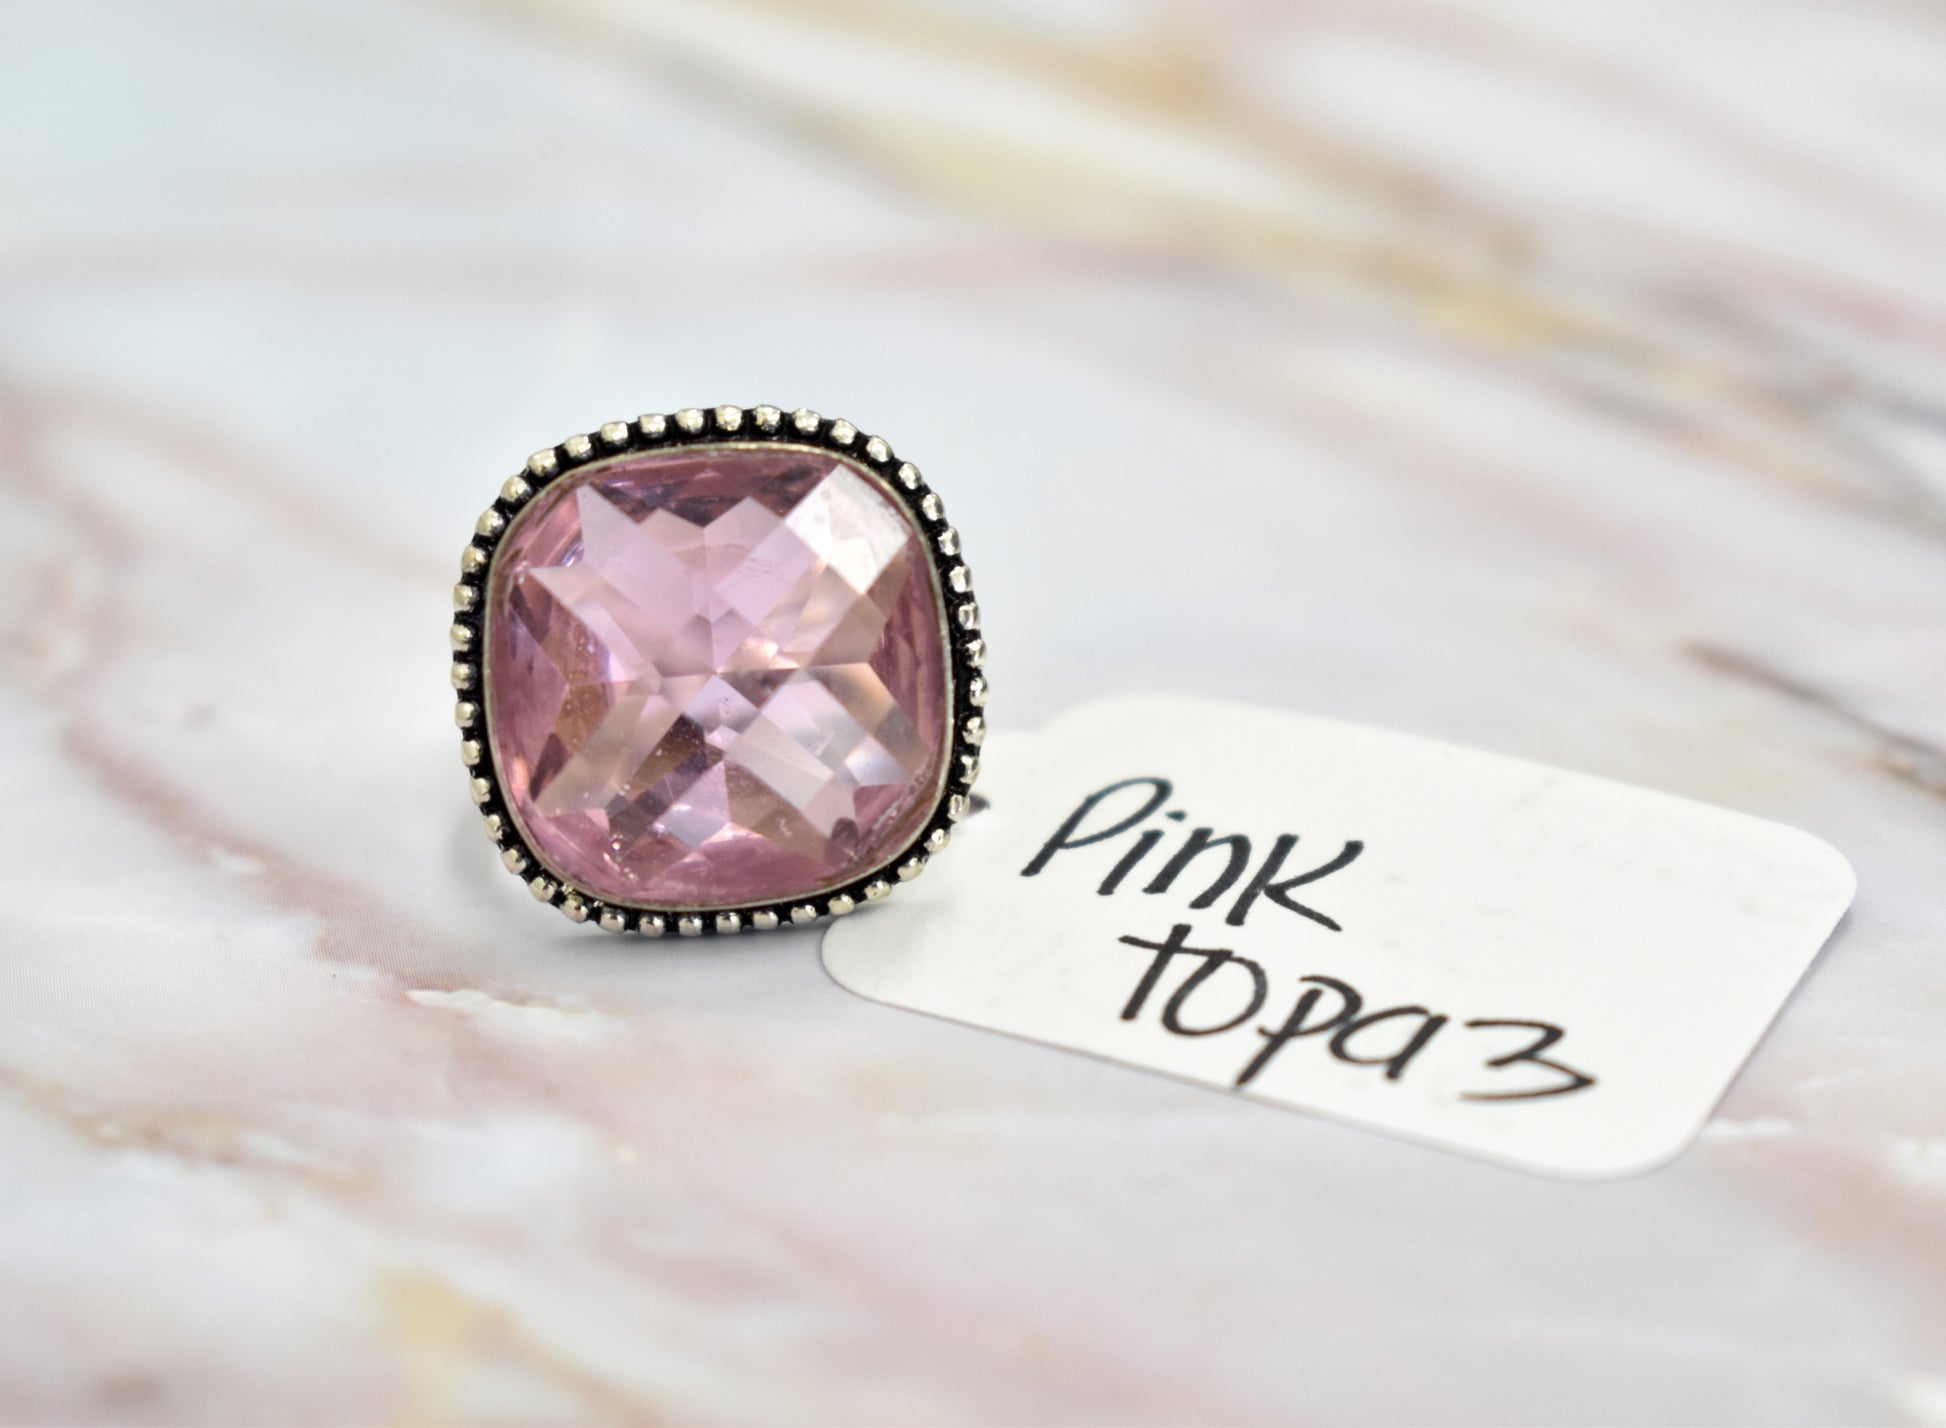 stones-of-transformation - Pink Topaz (Size 7.5) - Stones of Transformation - 